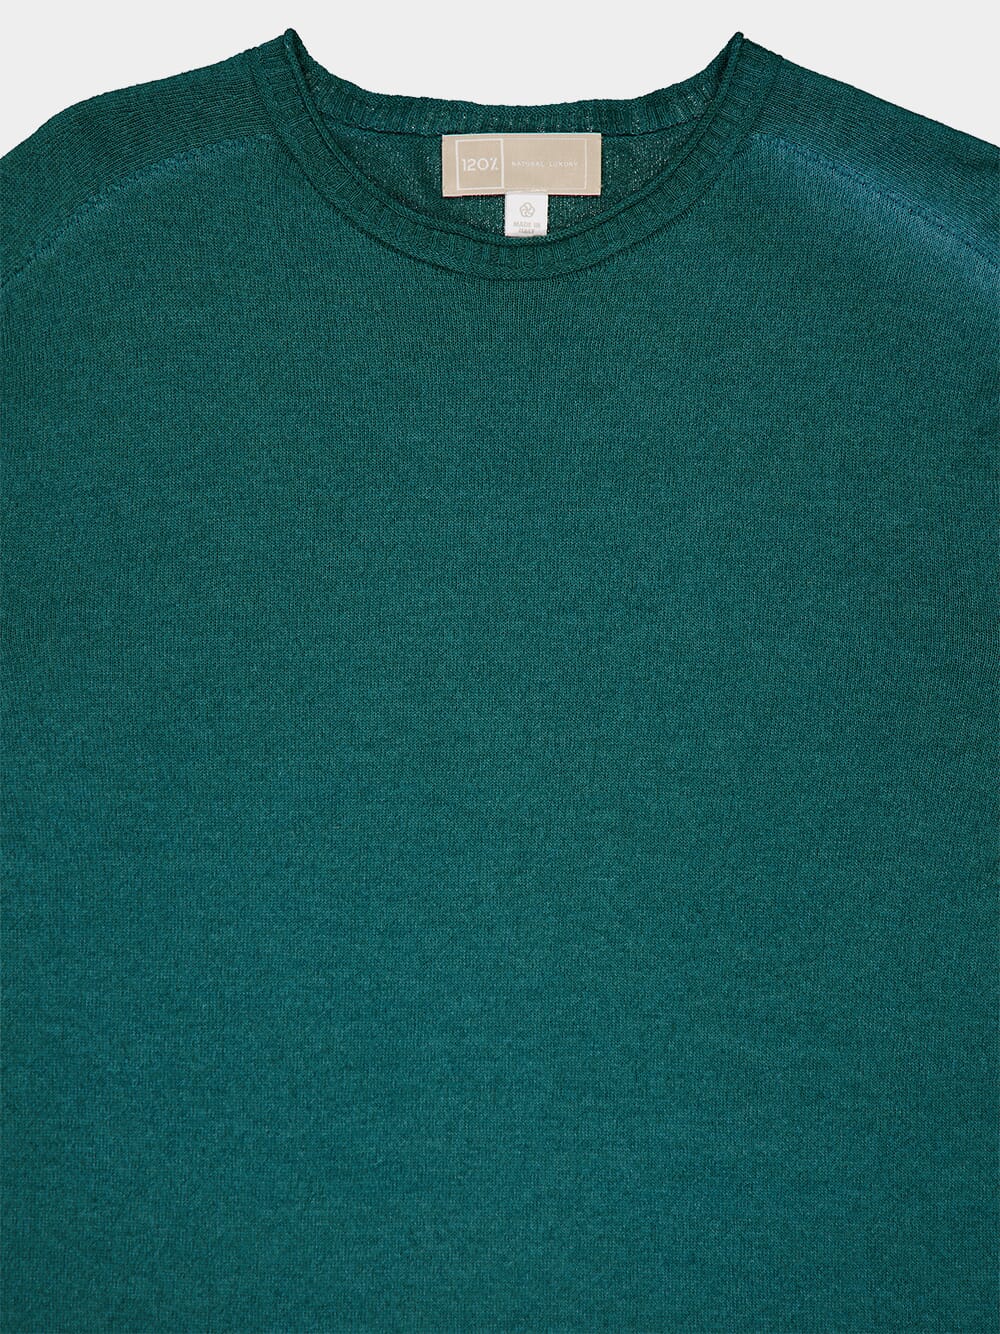 Green Cashmere C-Neck Sweater